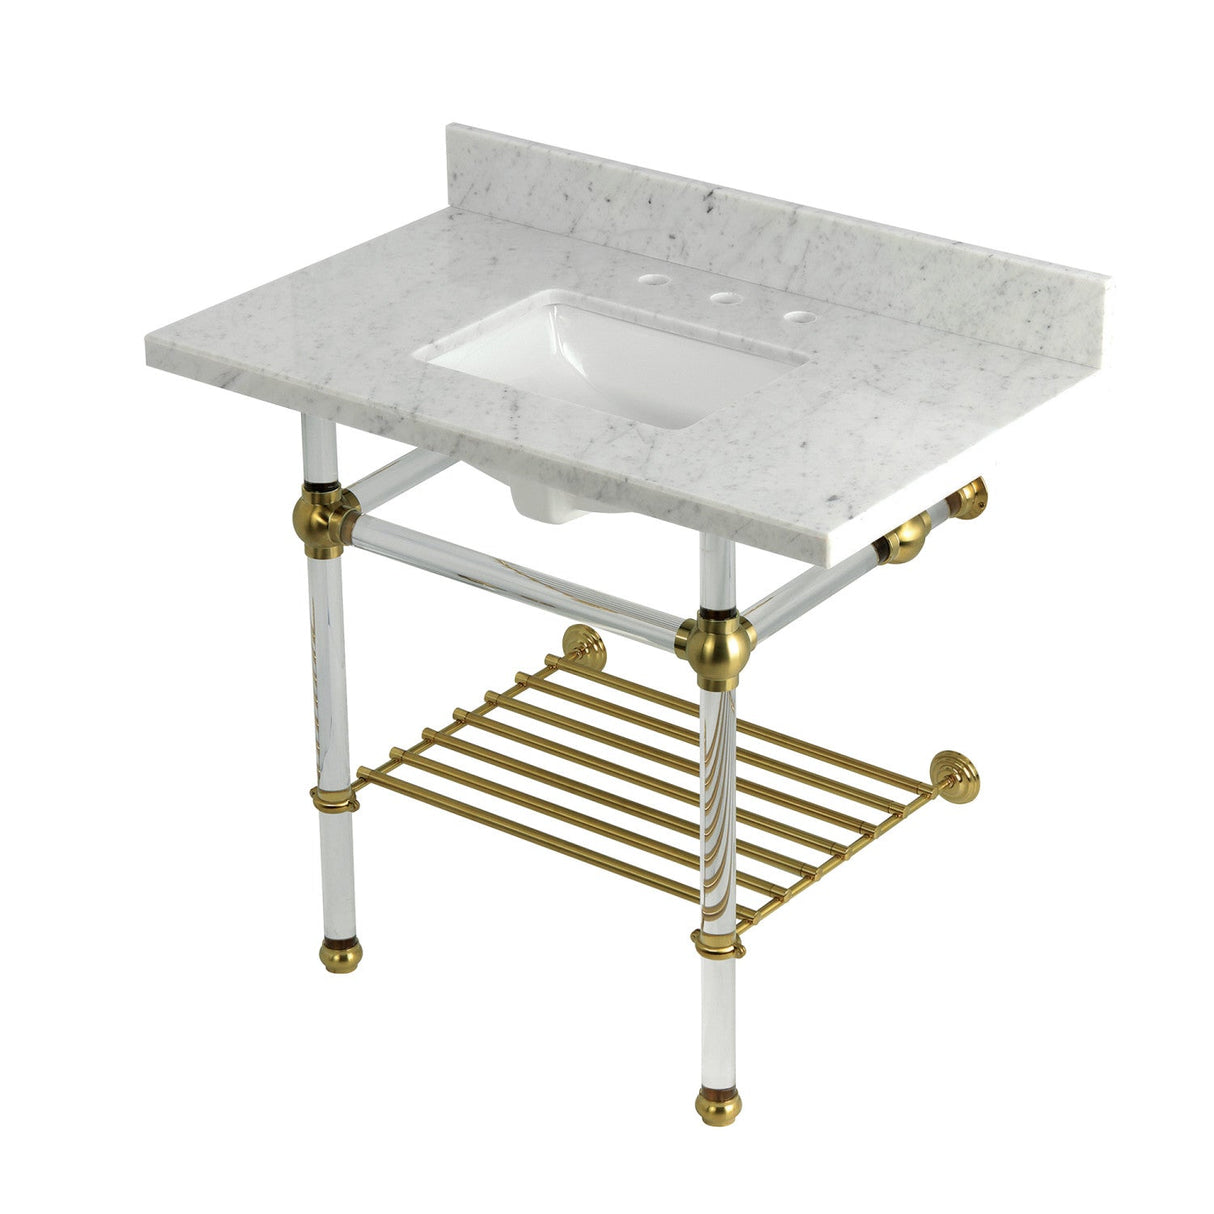 Templeton KVPB3630MASQB7 36-Inch Console Sink with Acrylic Legs (8-Inch, 3 Hole), Carrara Marble/Brushed Brass